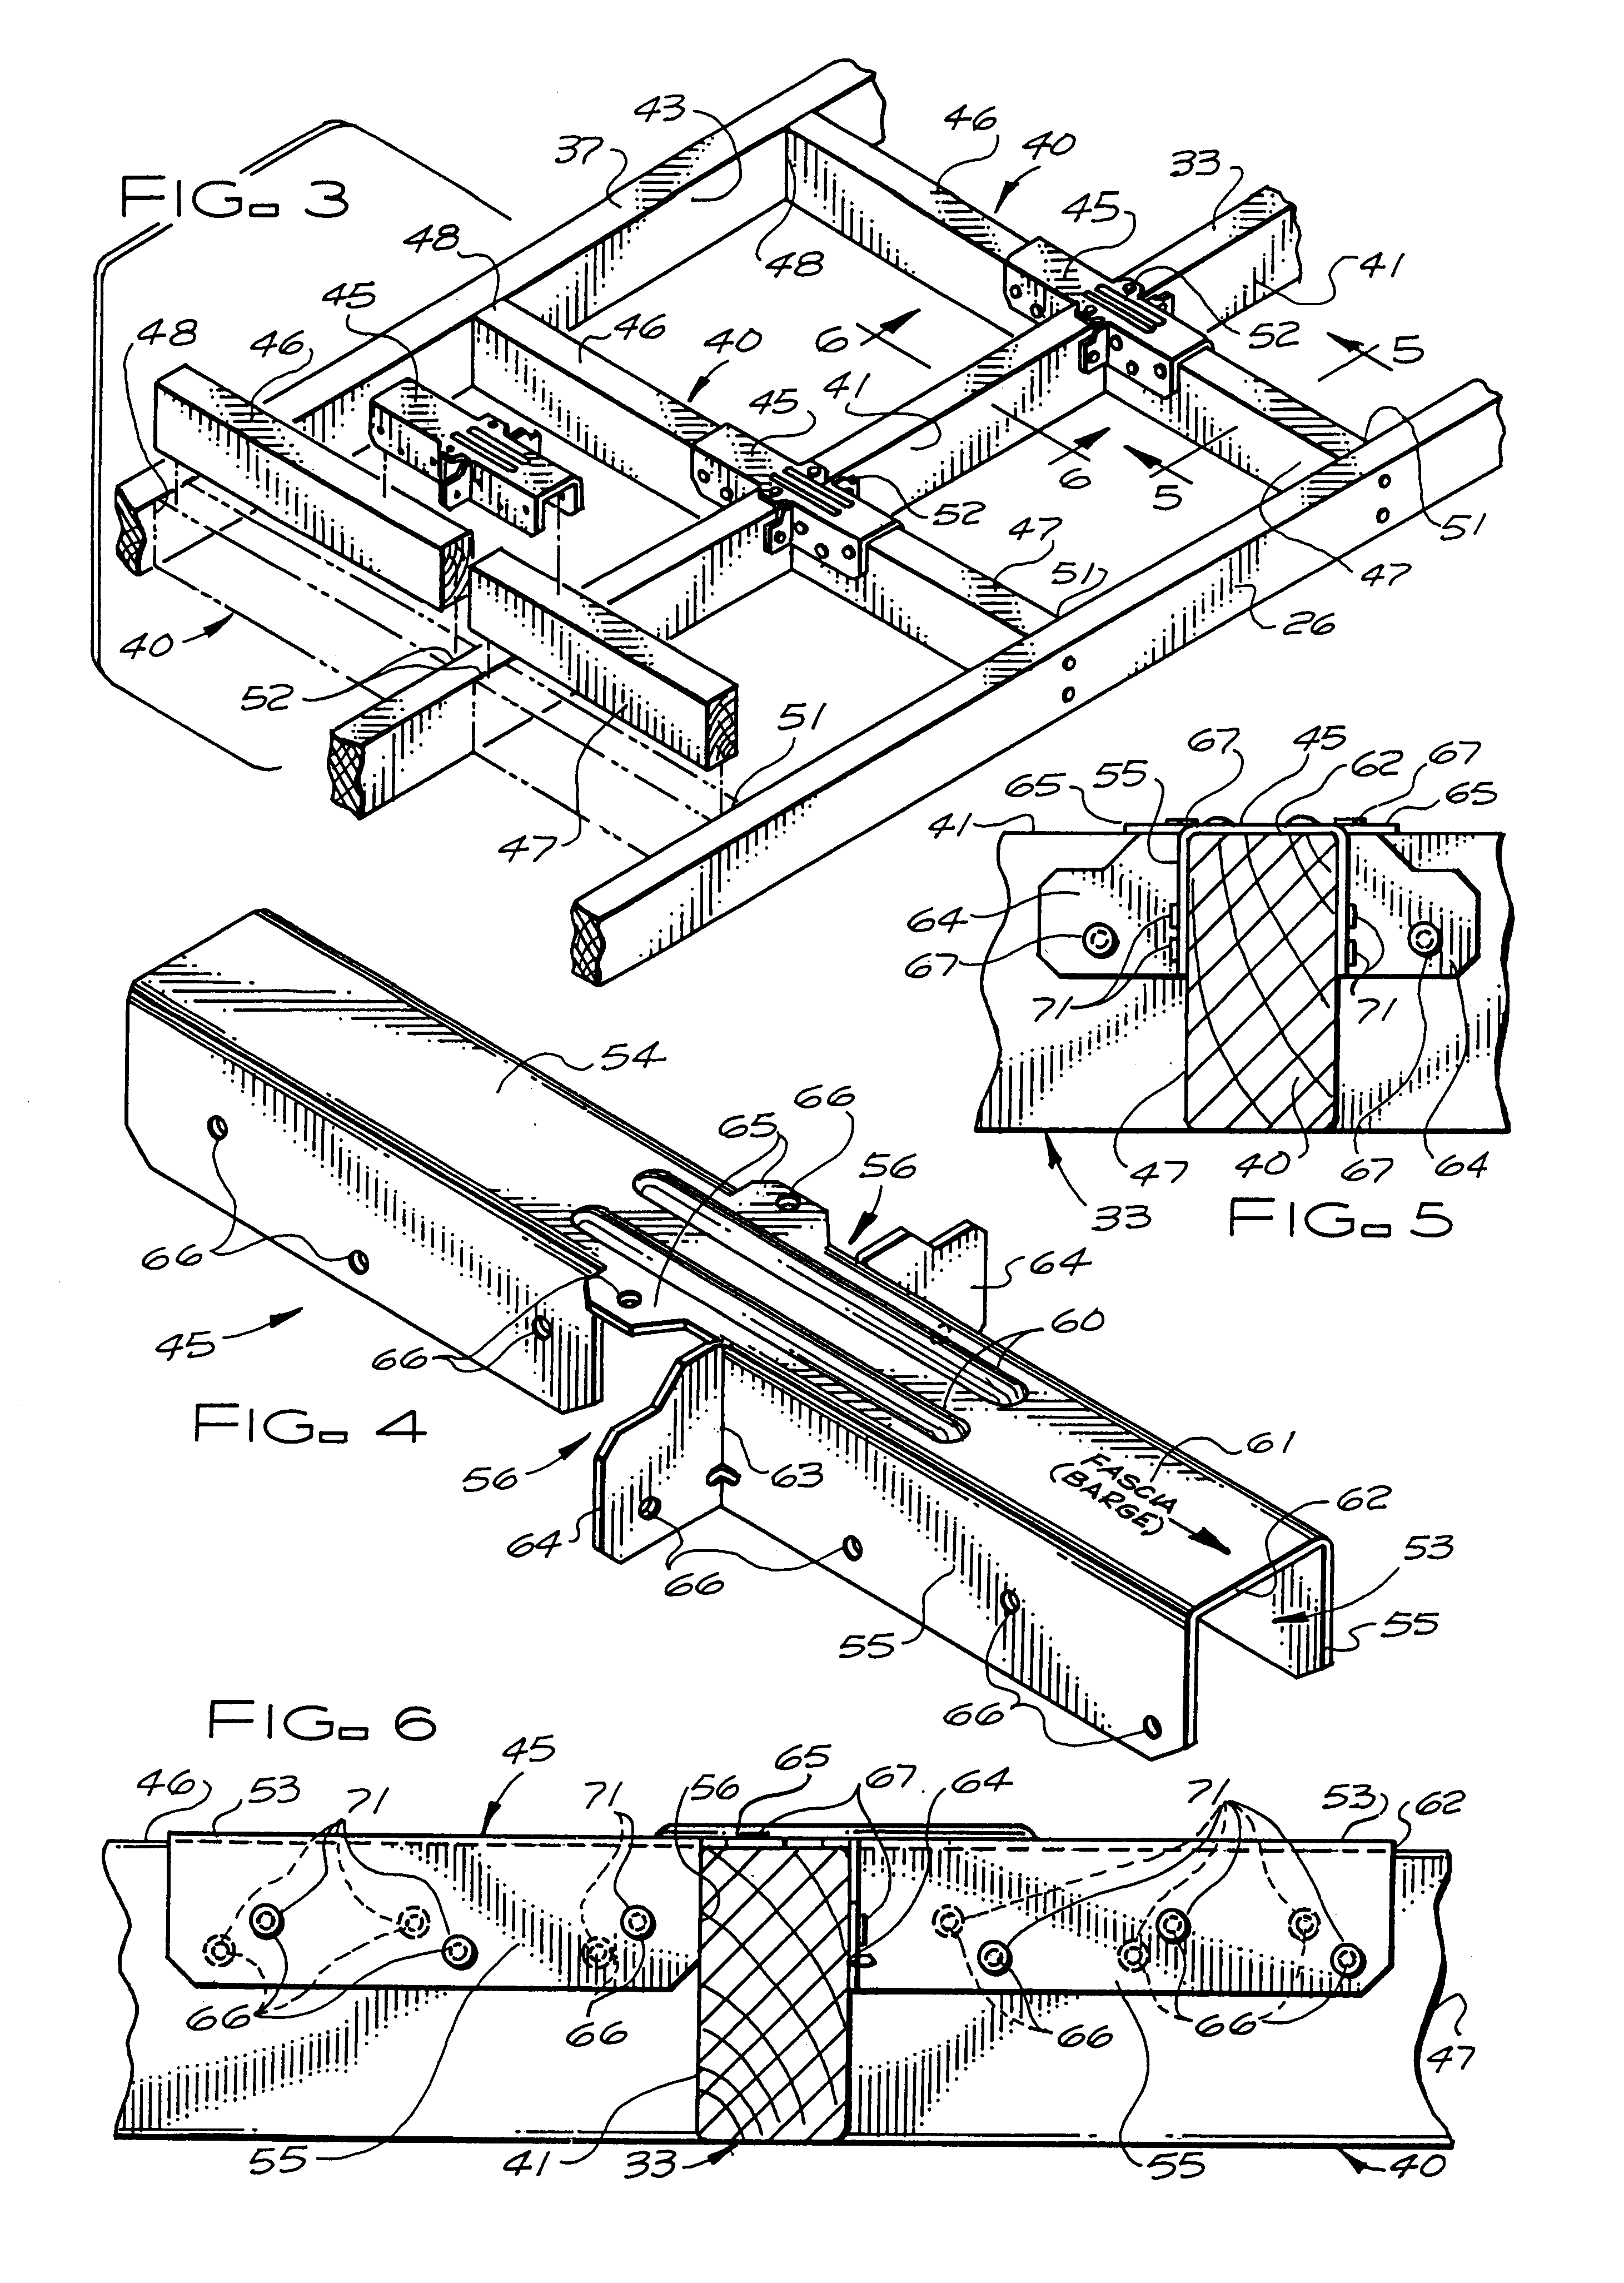 Overhang support system for gable roofs